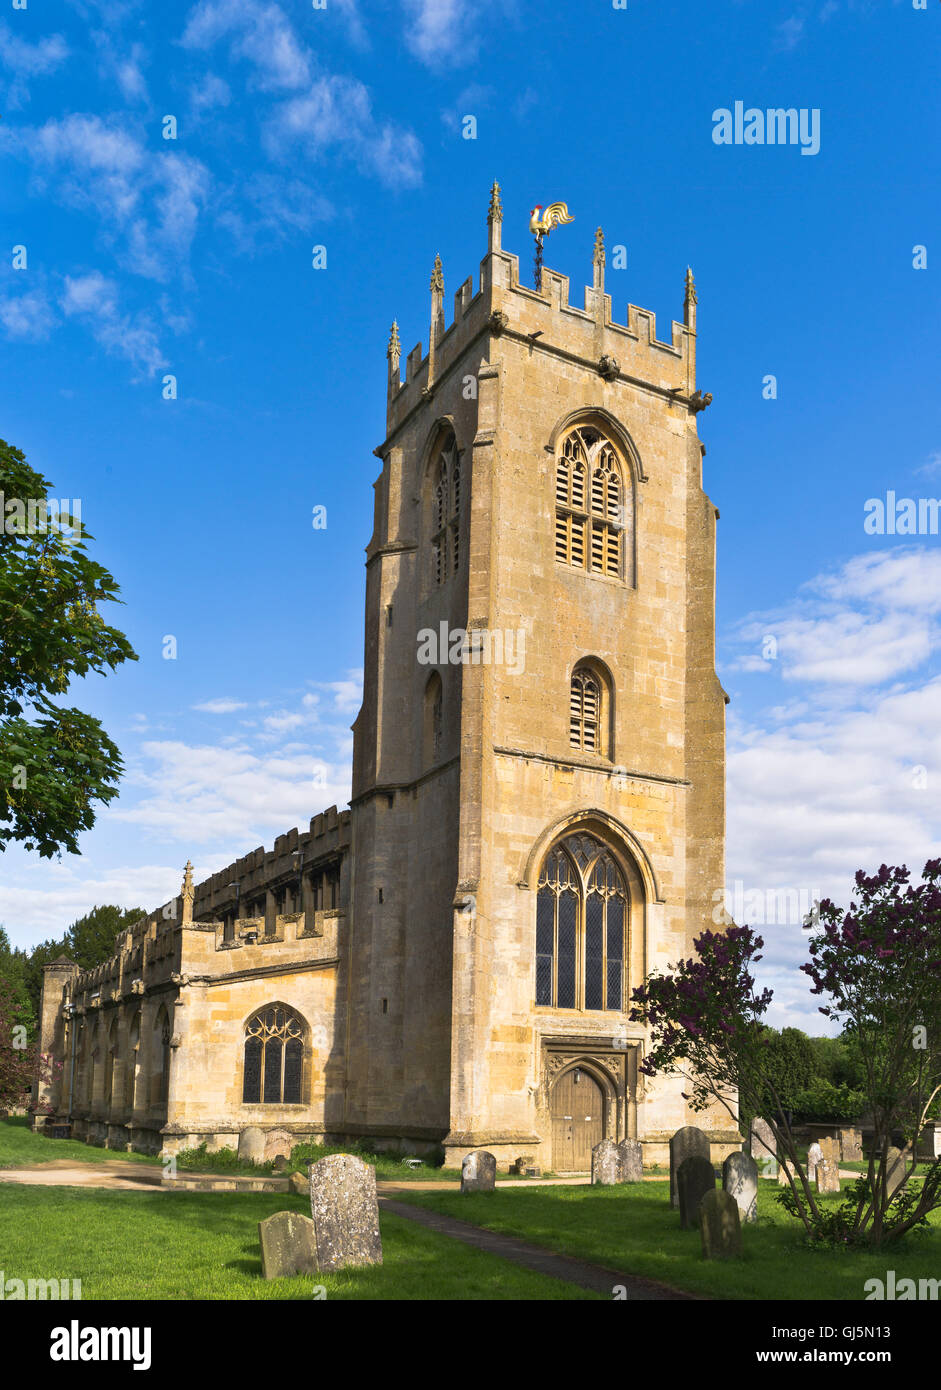 dh St Peters church WINCHCOMBE GLOUCESTERSHIRE Parish churches belfry tower churchyard gravestones Norman church cotswolds village england uk exterior Stock Photo